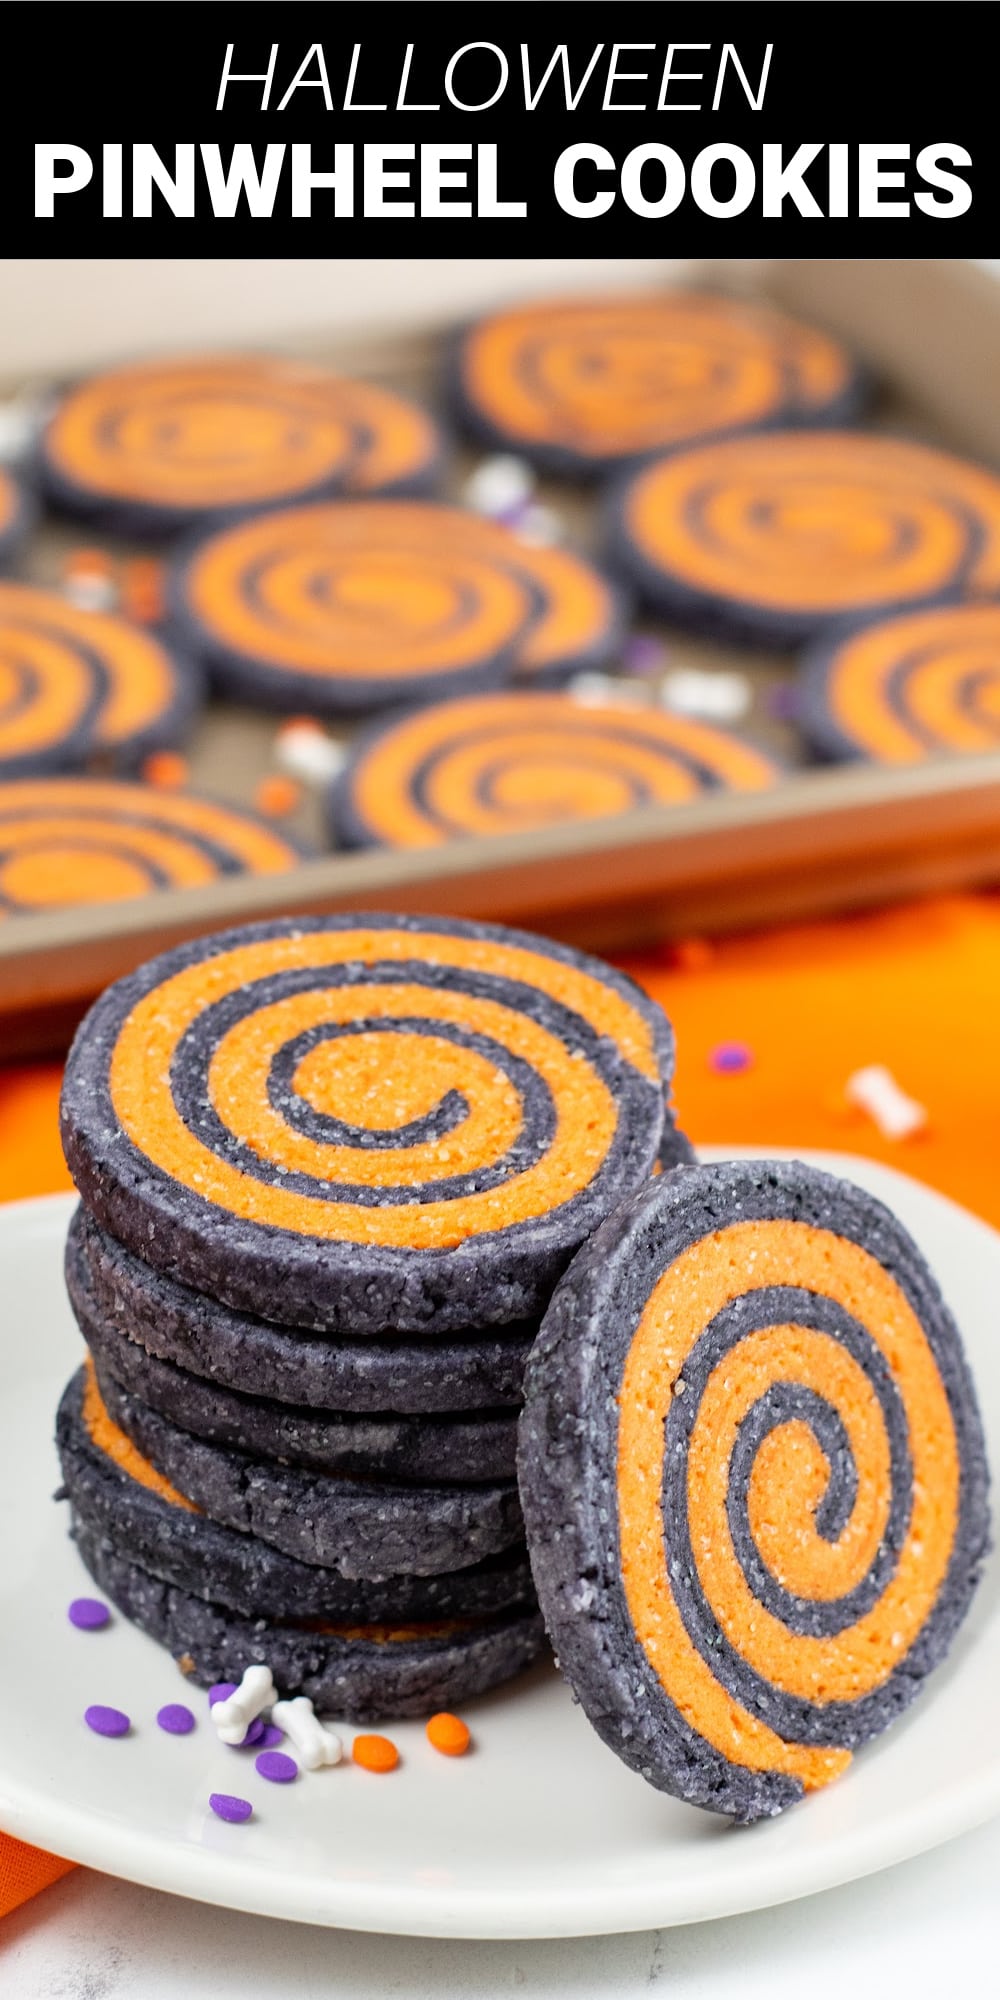 These Halloween pinwheel cookies are a perfect delicious and eye-catching treat for your next Halloween party. Rich and buttery sugar cookie dough is colored black and orange, then rolled together and cut into discs to reveal a pretty Halloween pinwheel design.